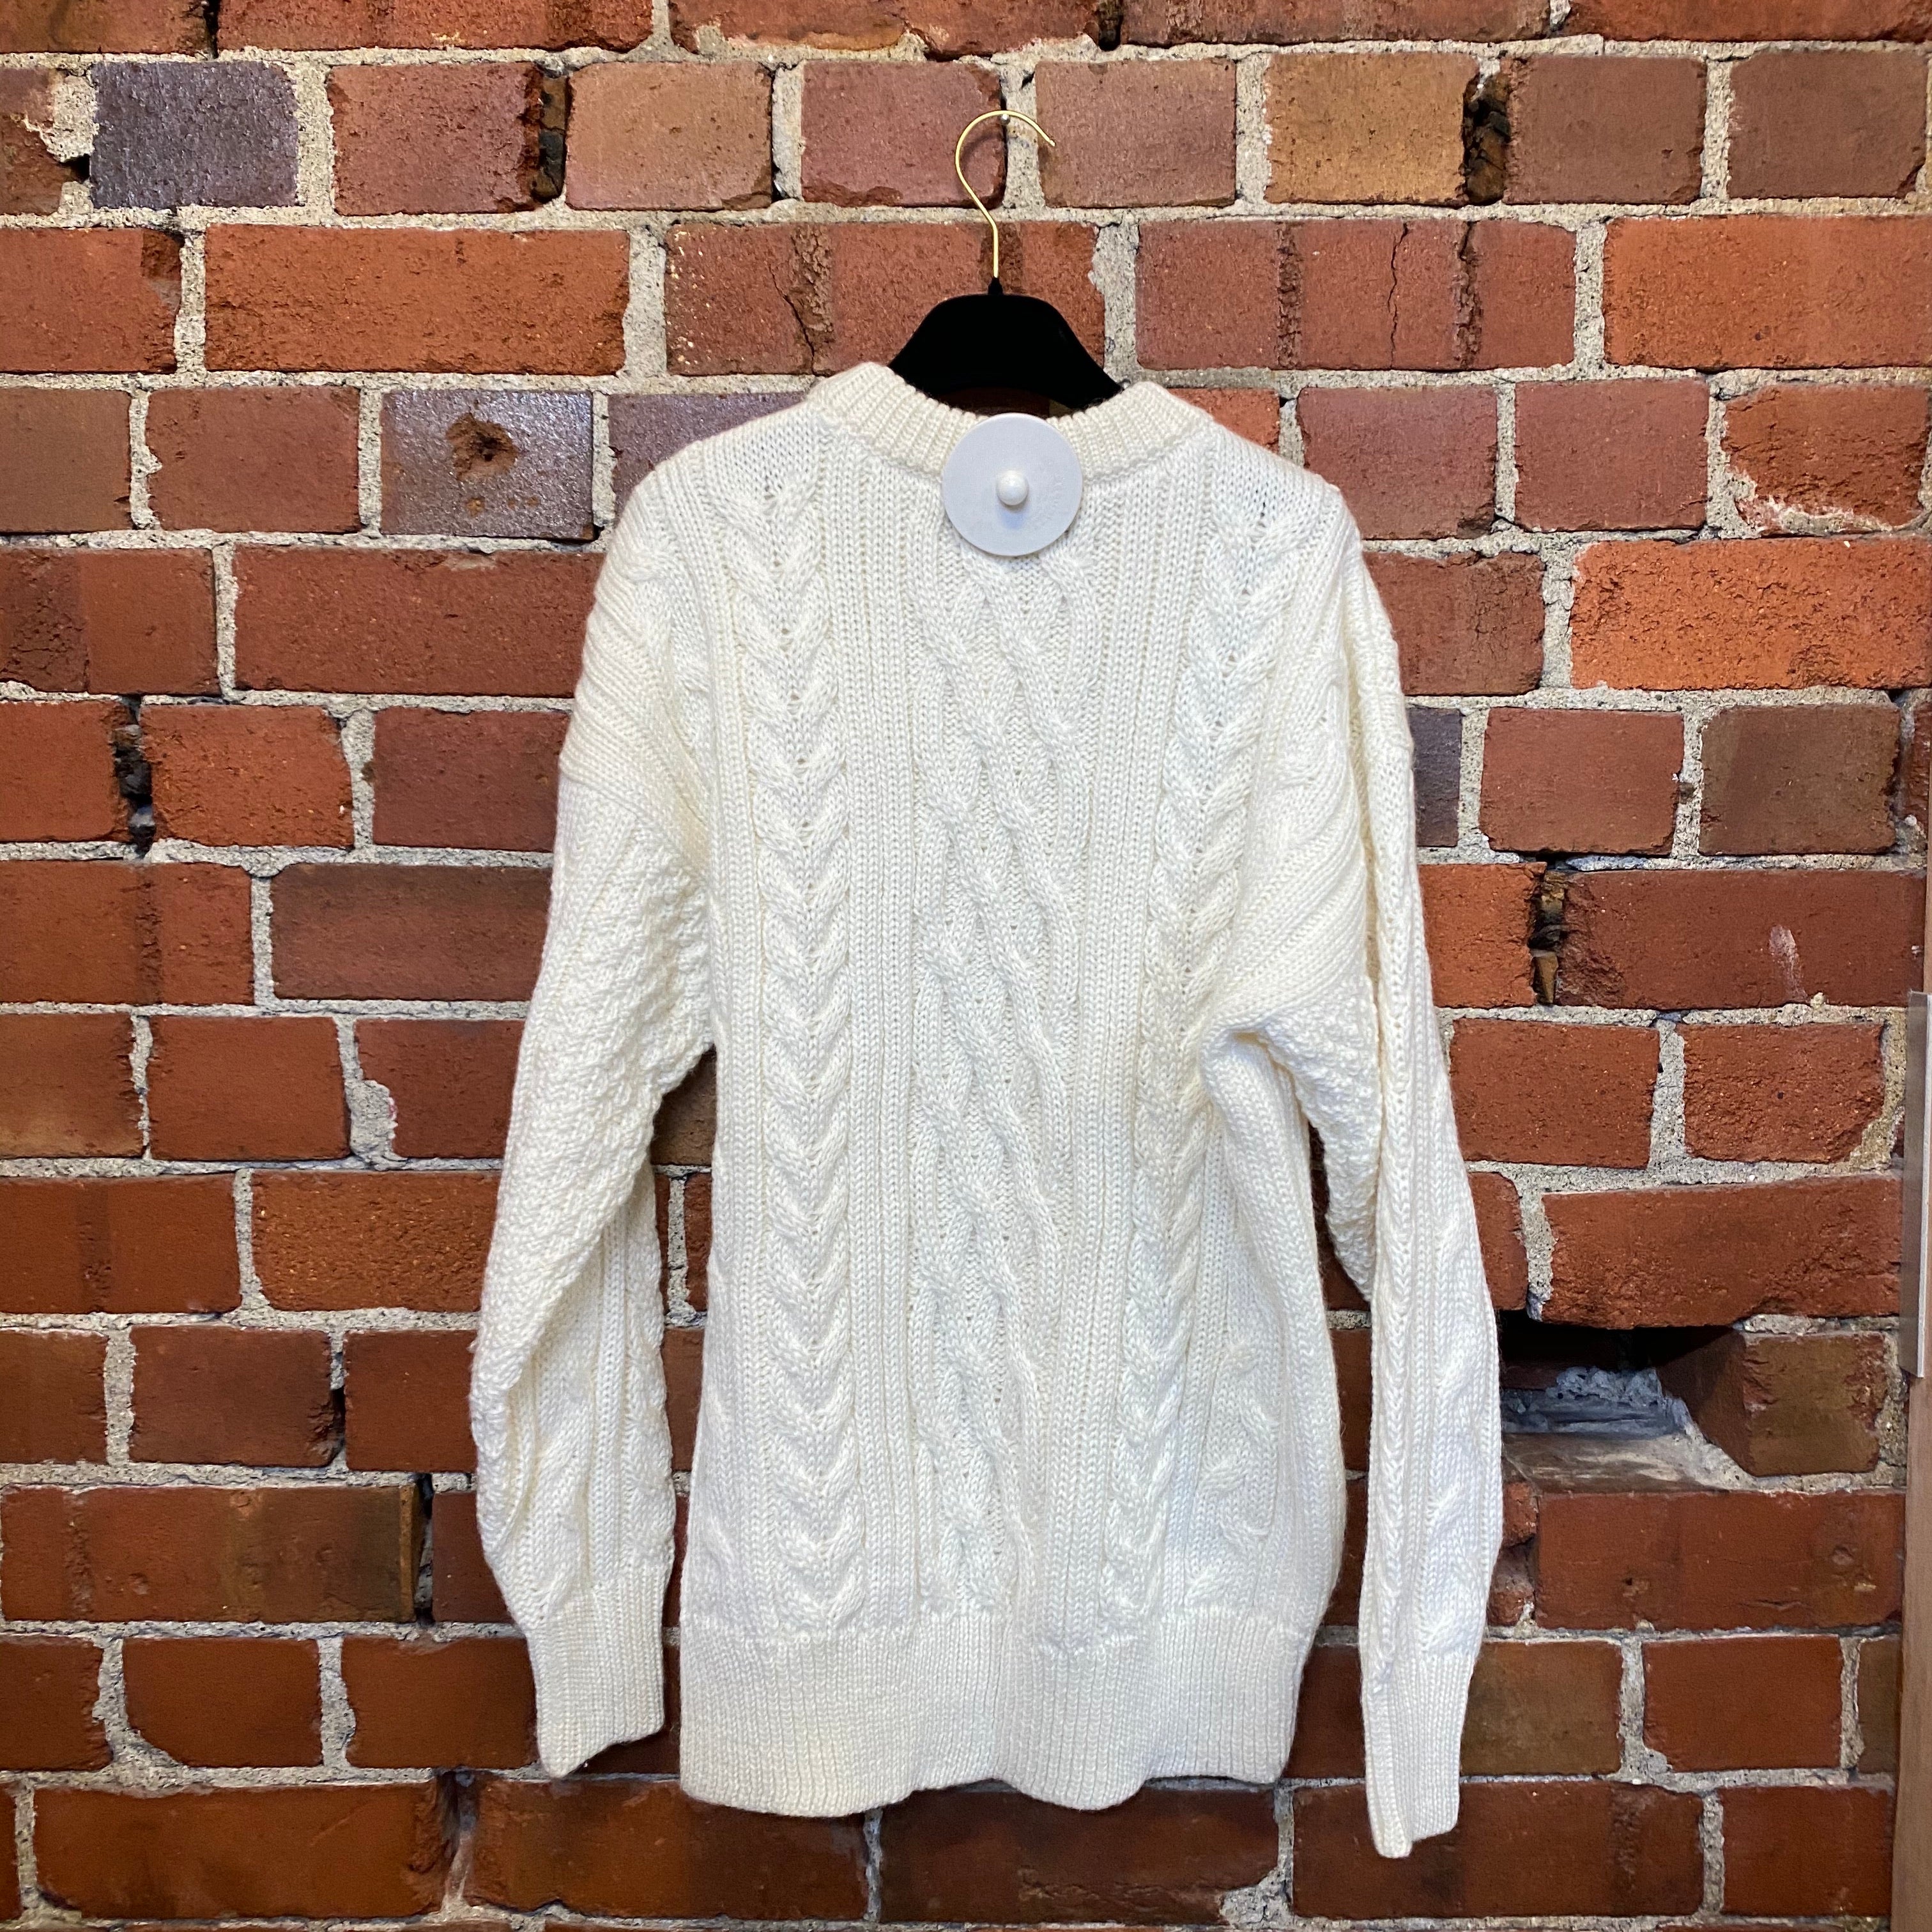 WOOLOVERS cable knit jumper